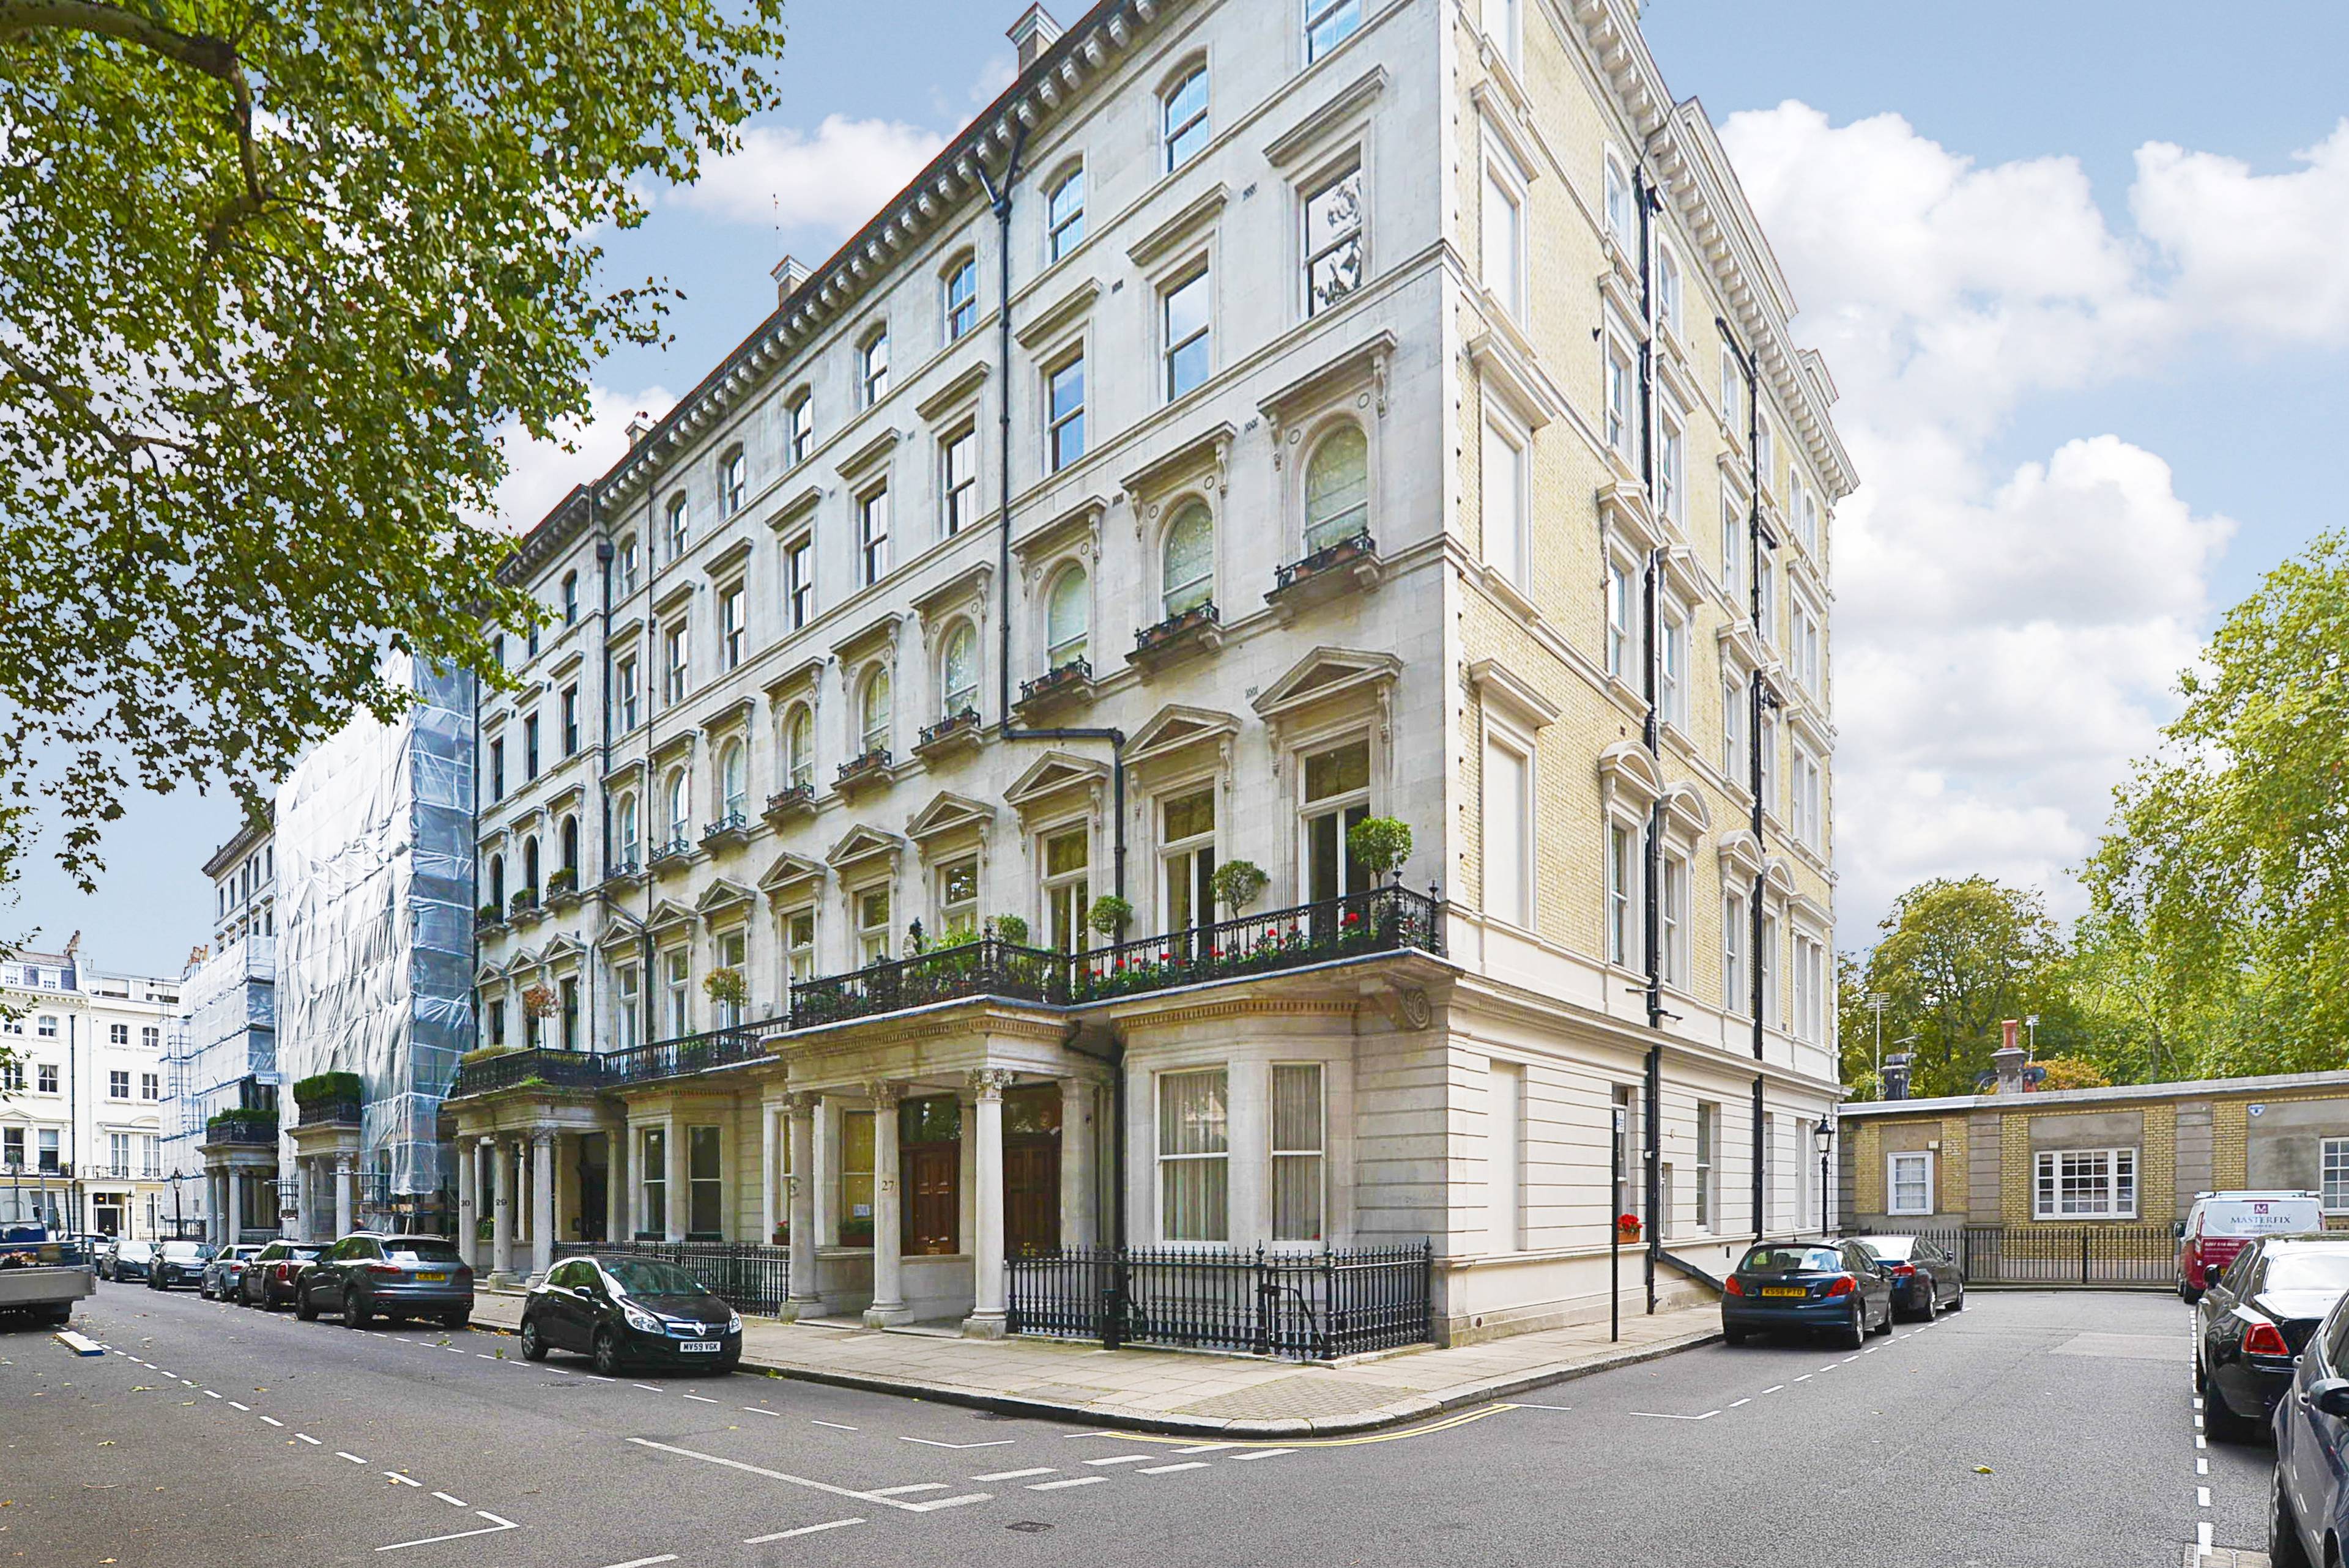 A stunning third floor apartment, with lift, on this enviable garden square in the heart of Knightsbridge.